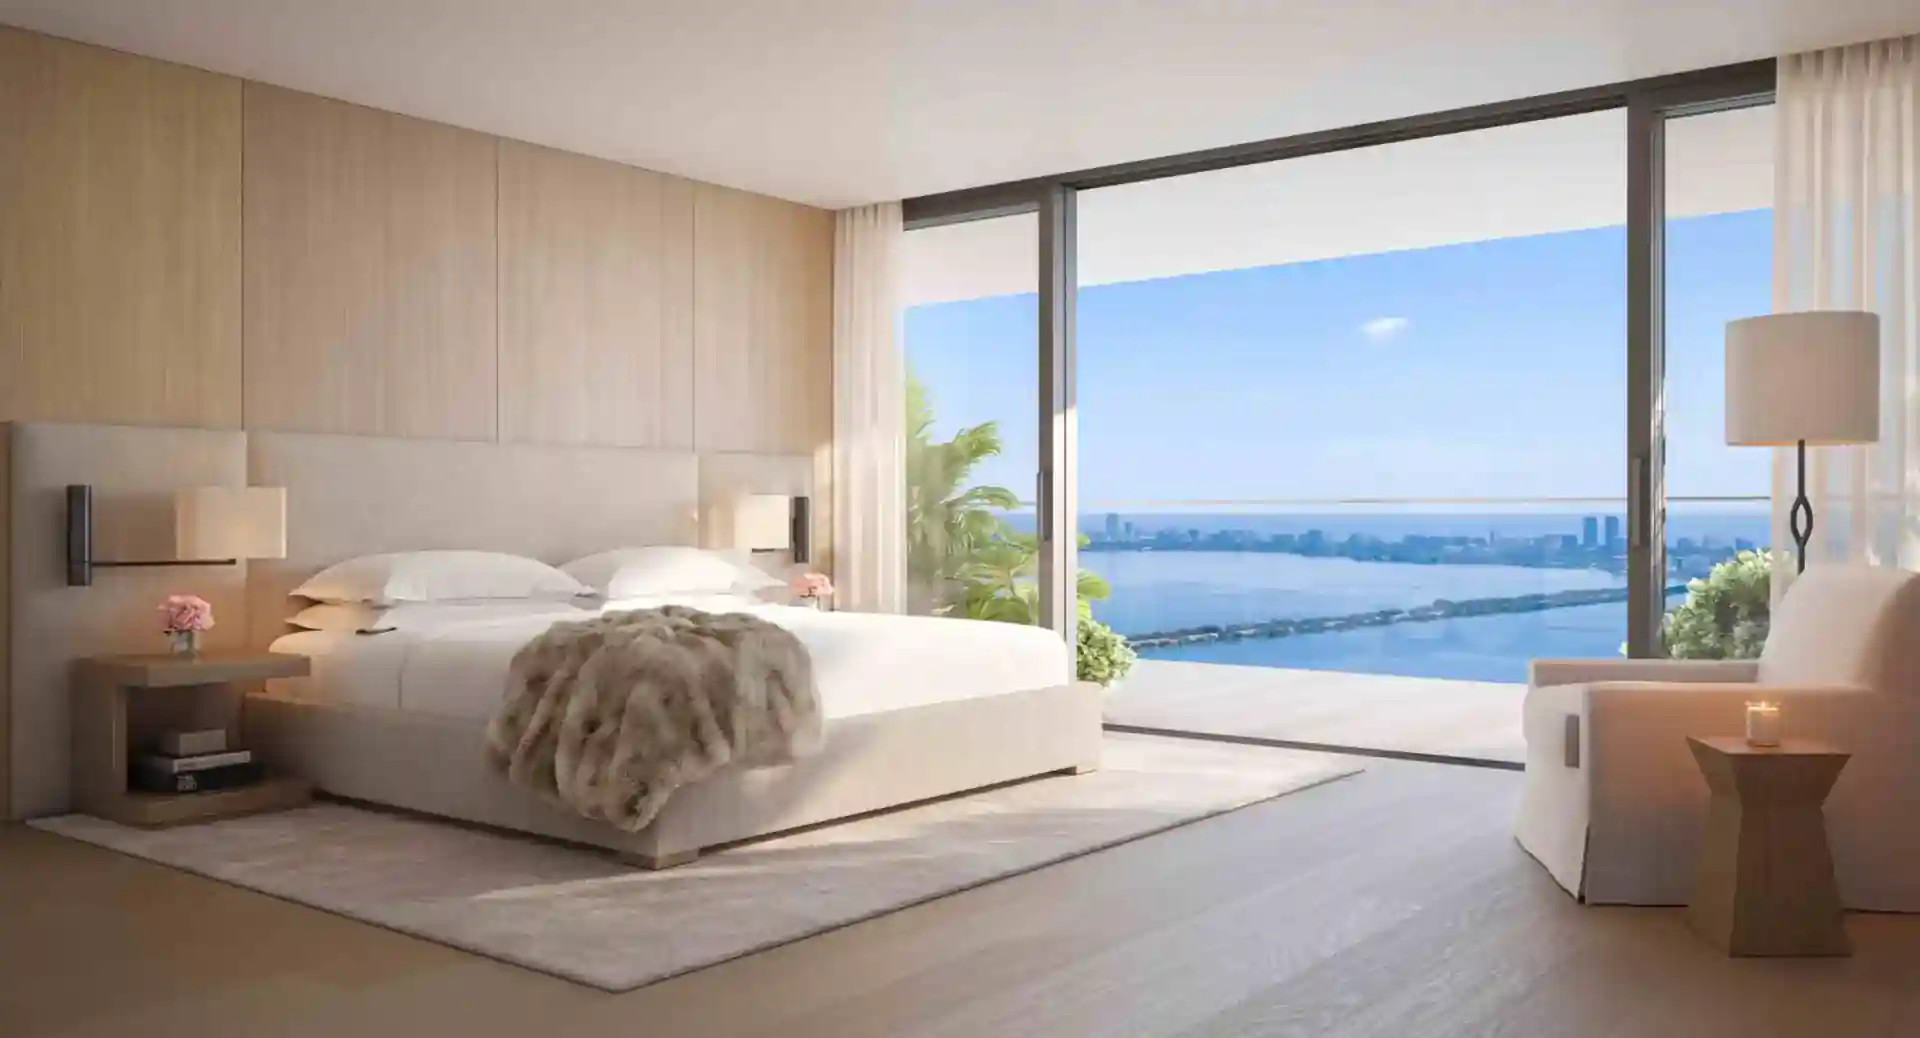 Bedroom with panoramic view of city and sea